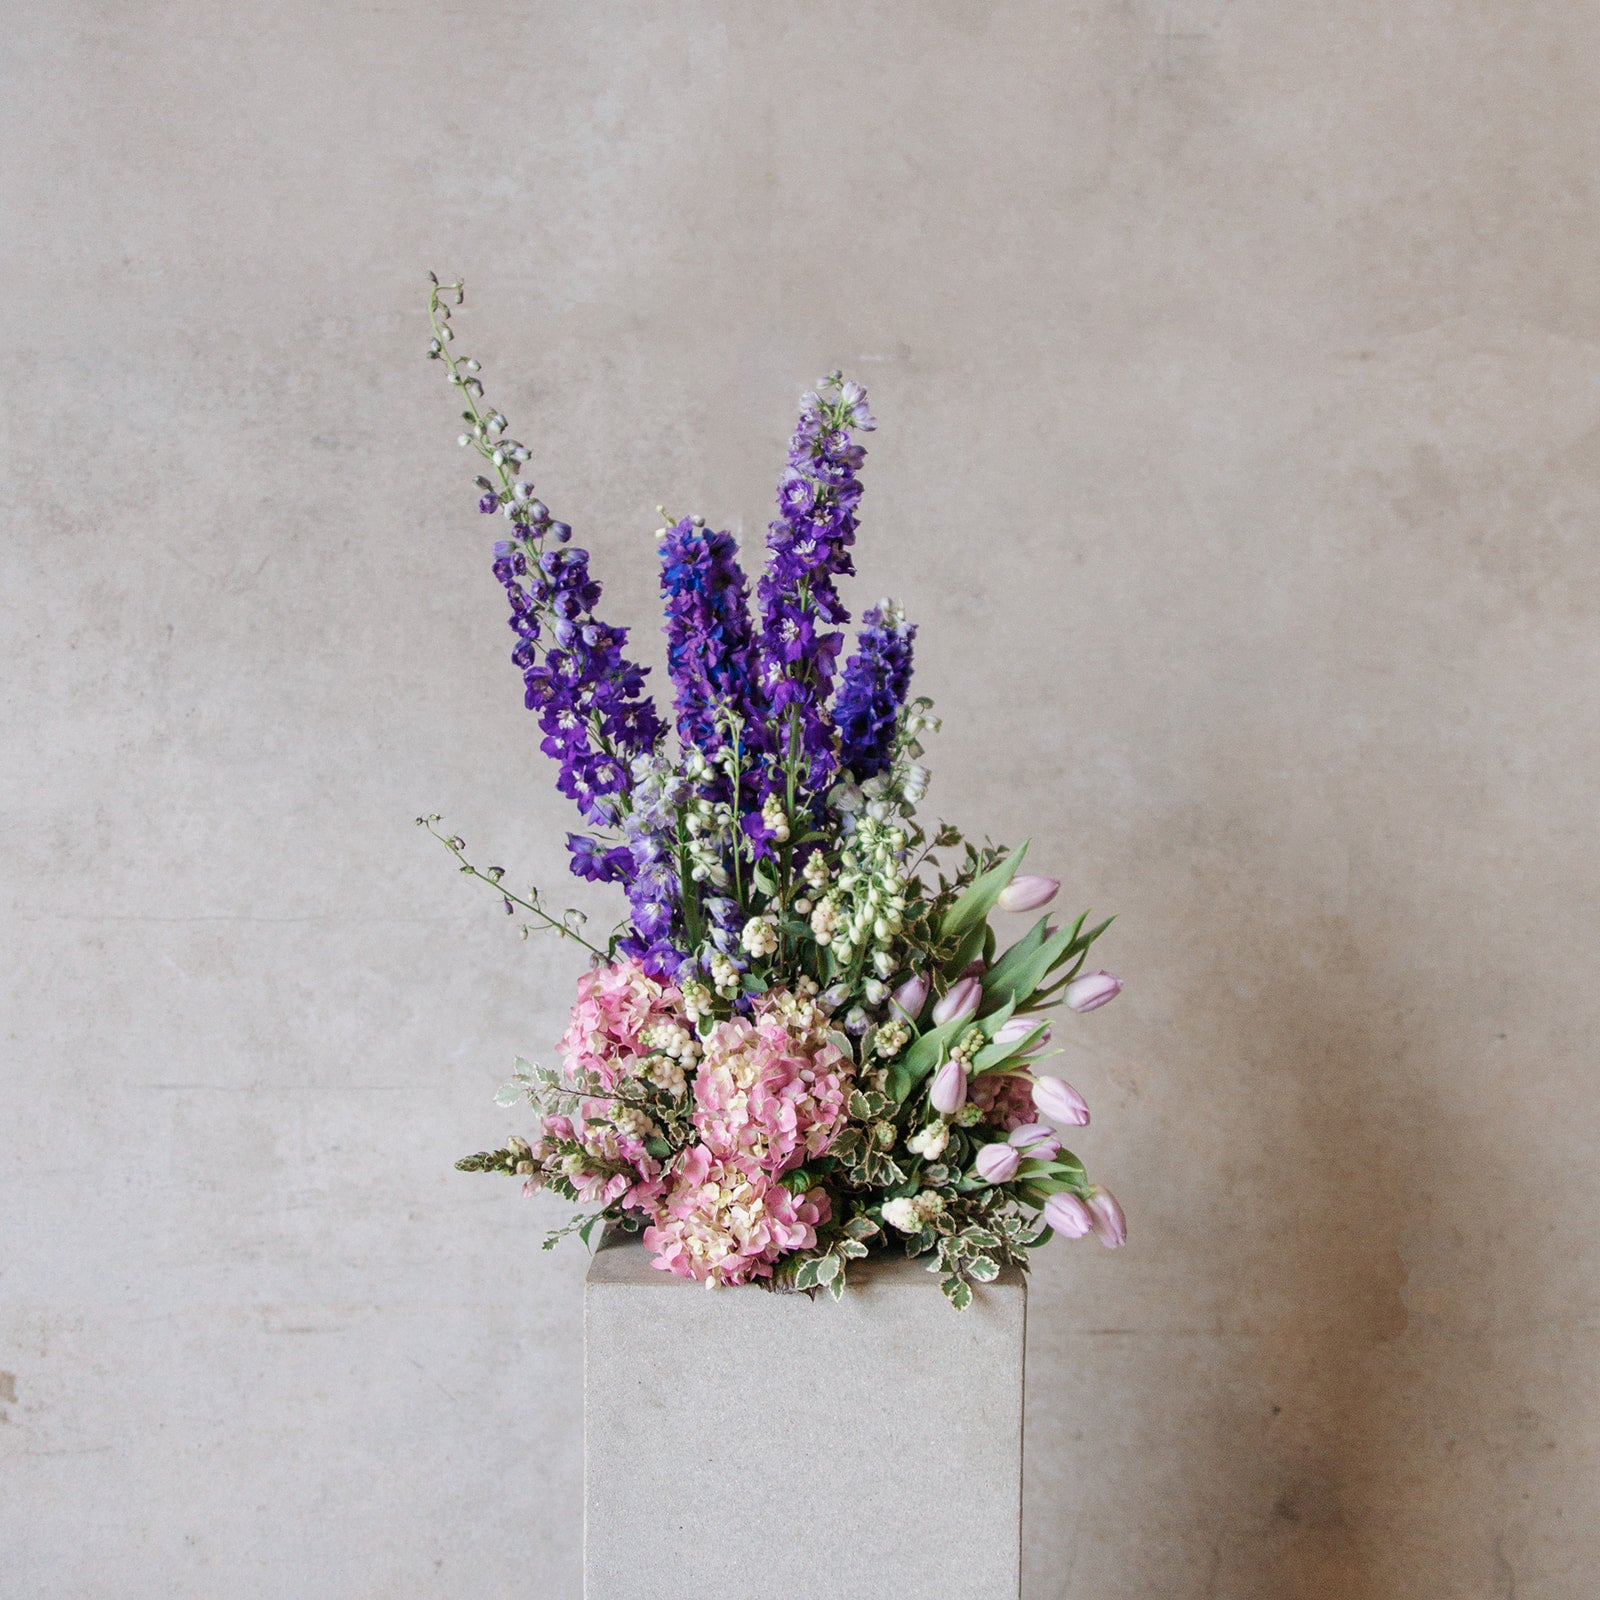 Statement floral arrangement in white green and purple colour